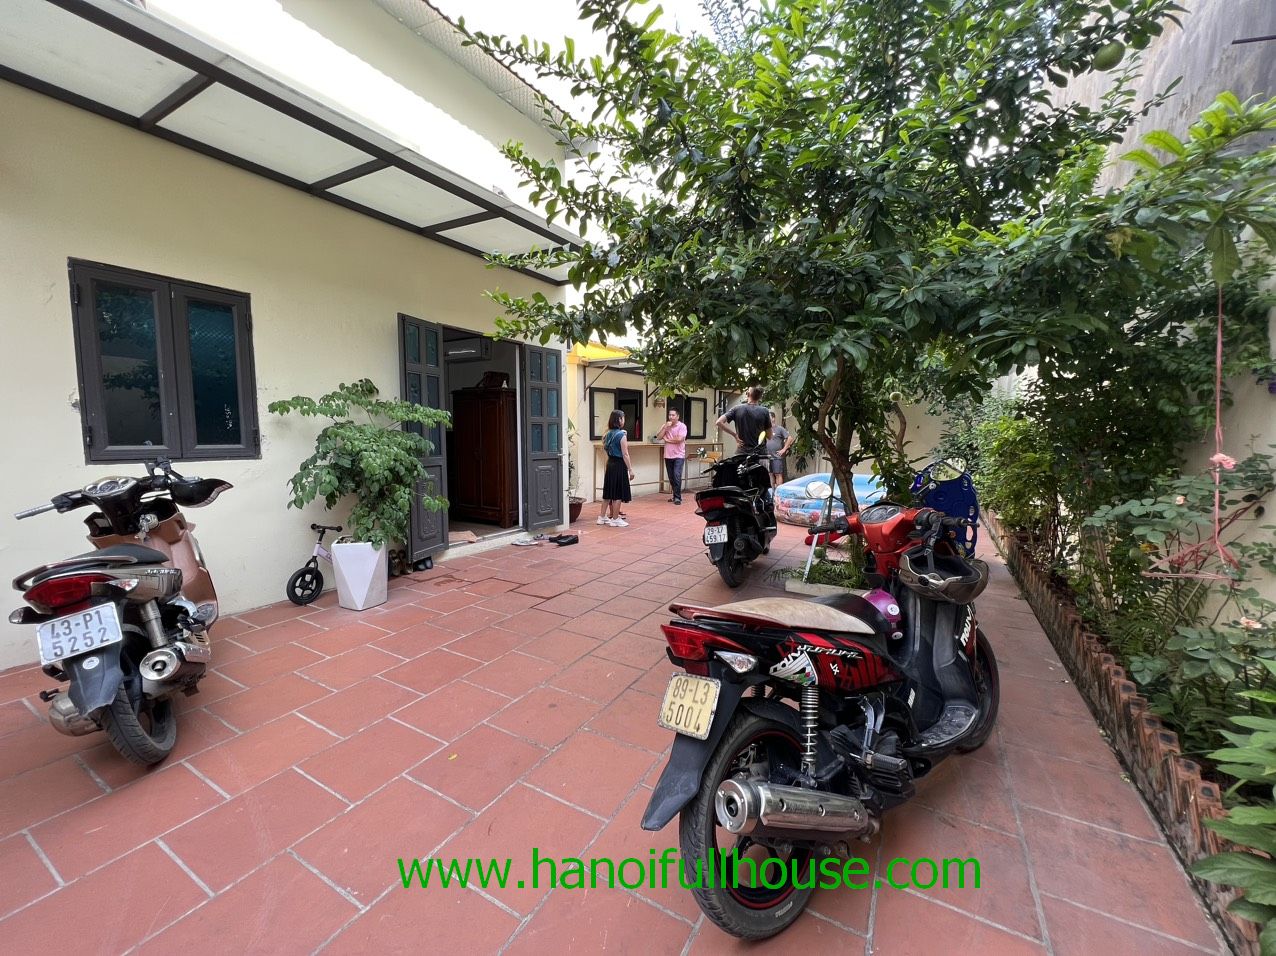 170-sqm 3-BR house with large front yard in Long Bien district